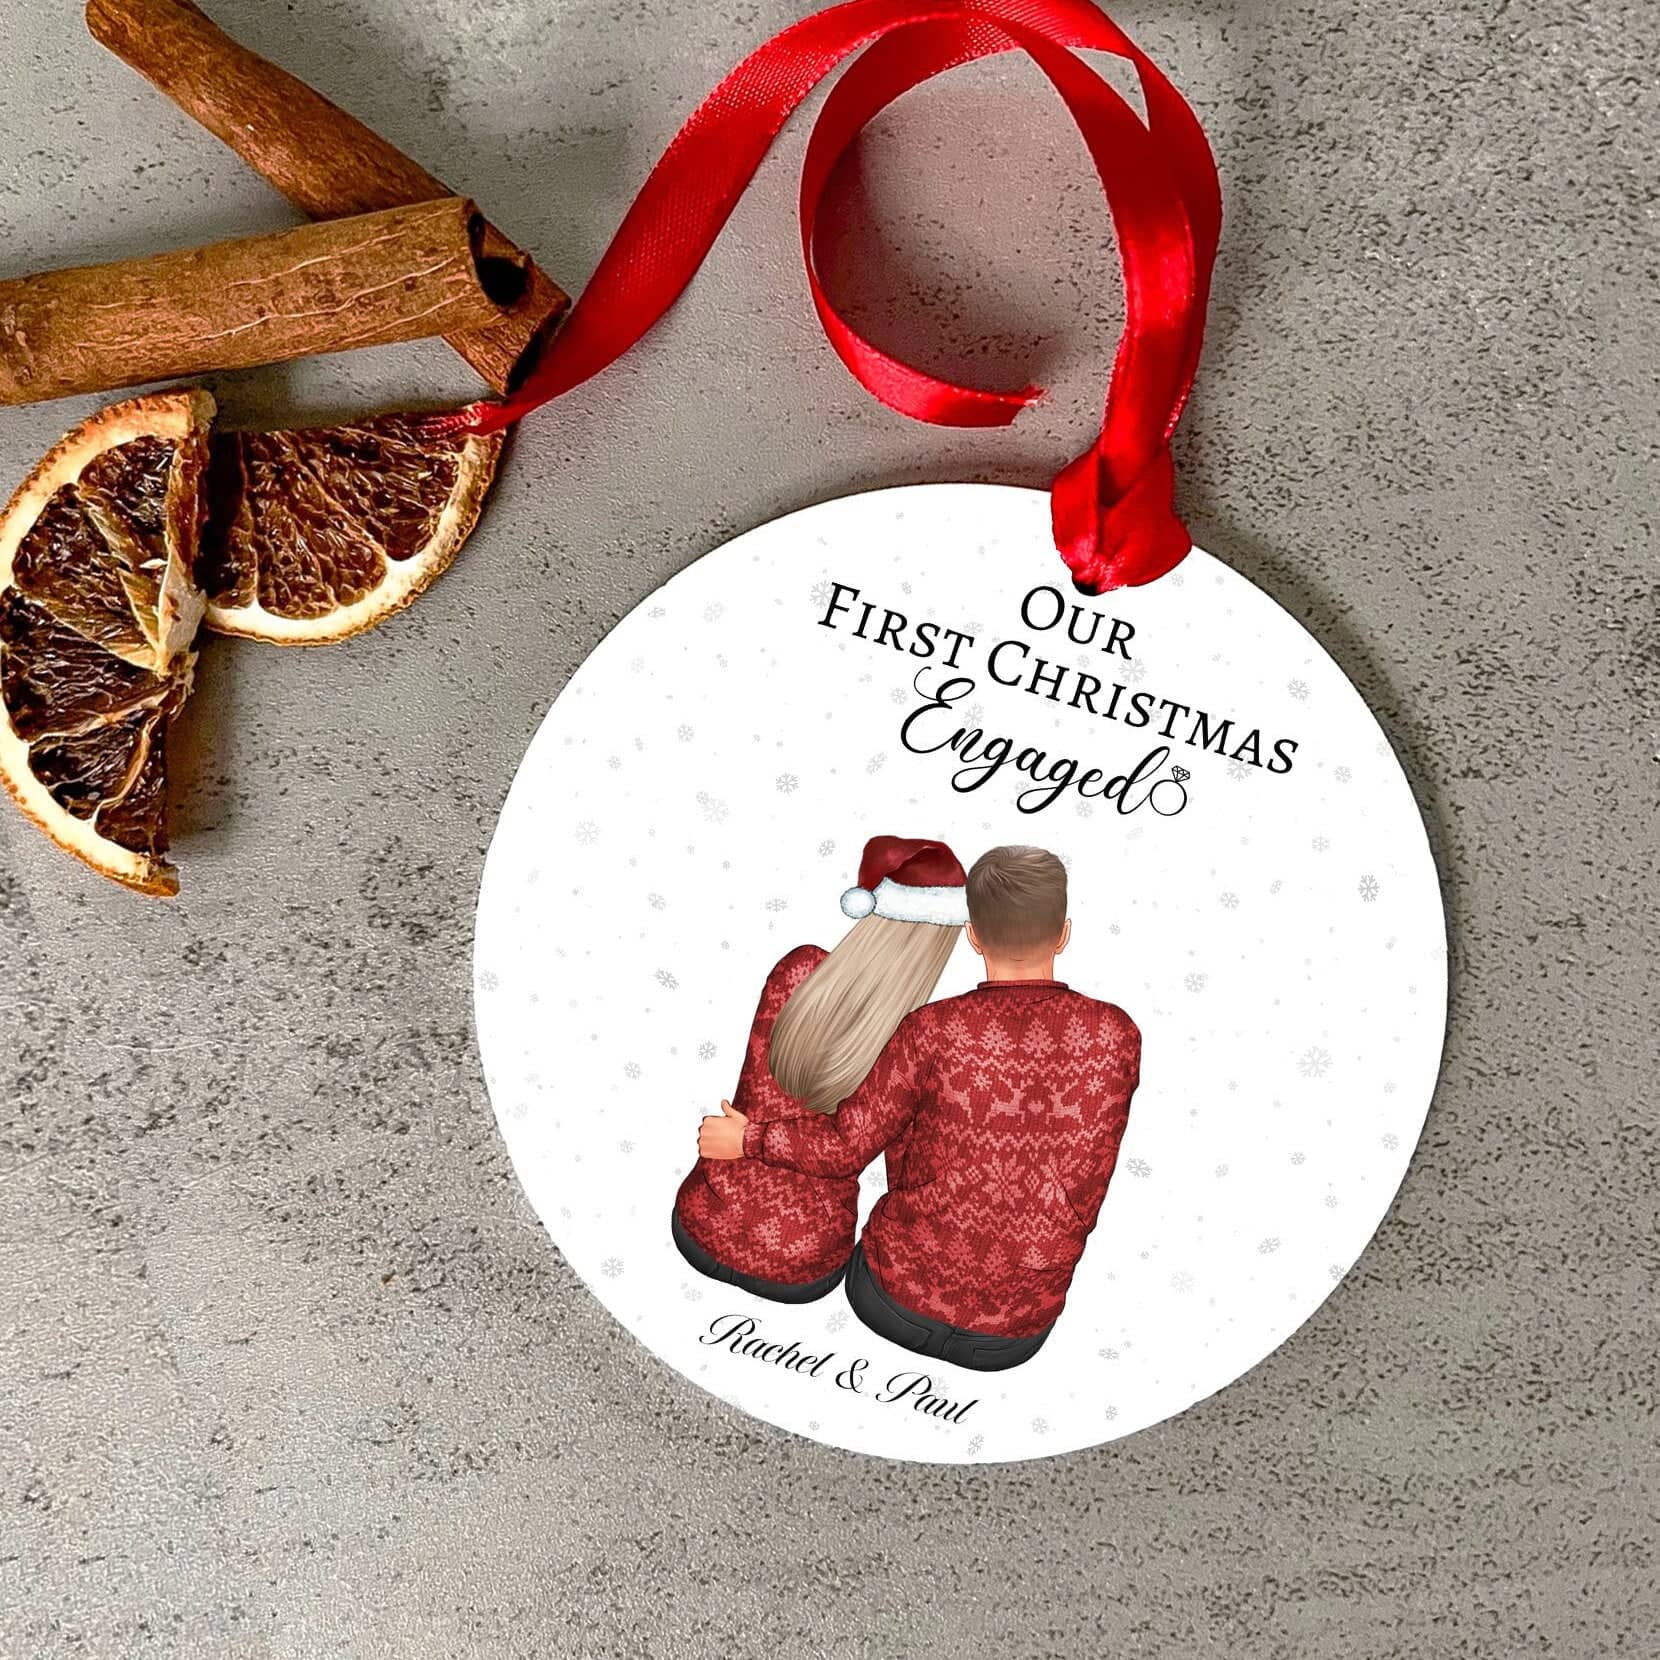 Our first christmas engaged bauble, personalised couple christmas ornament, unique couple christmas gift, Gift for Newly Engaged, Engagement gifts xmas, christmas jumpers, Personalised Baubles,Secret santa gift,Sister gift, daughter son tree decor